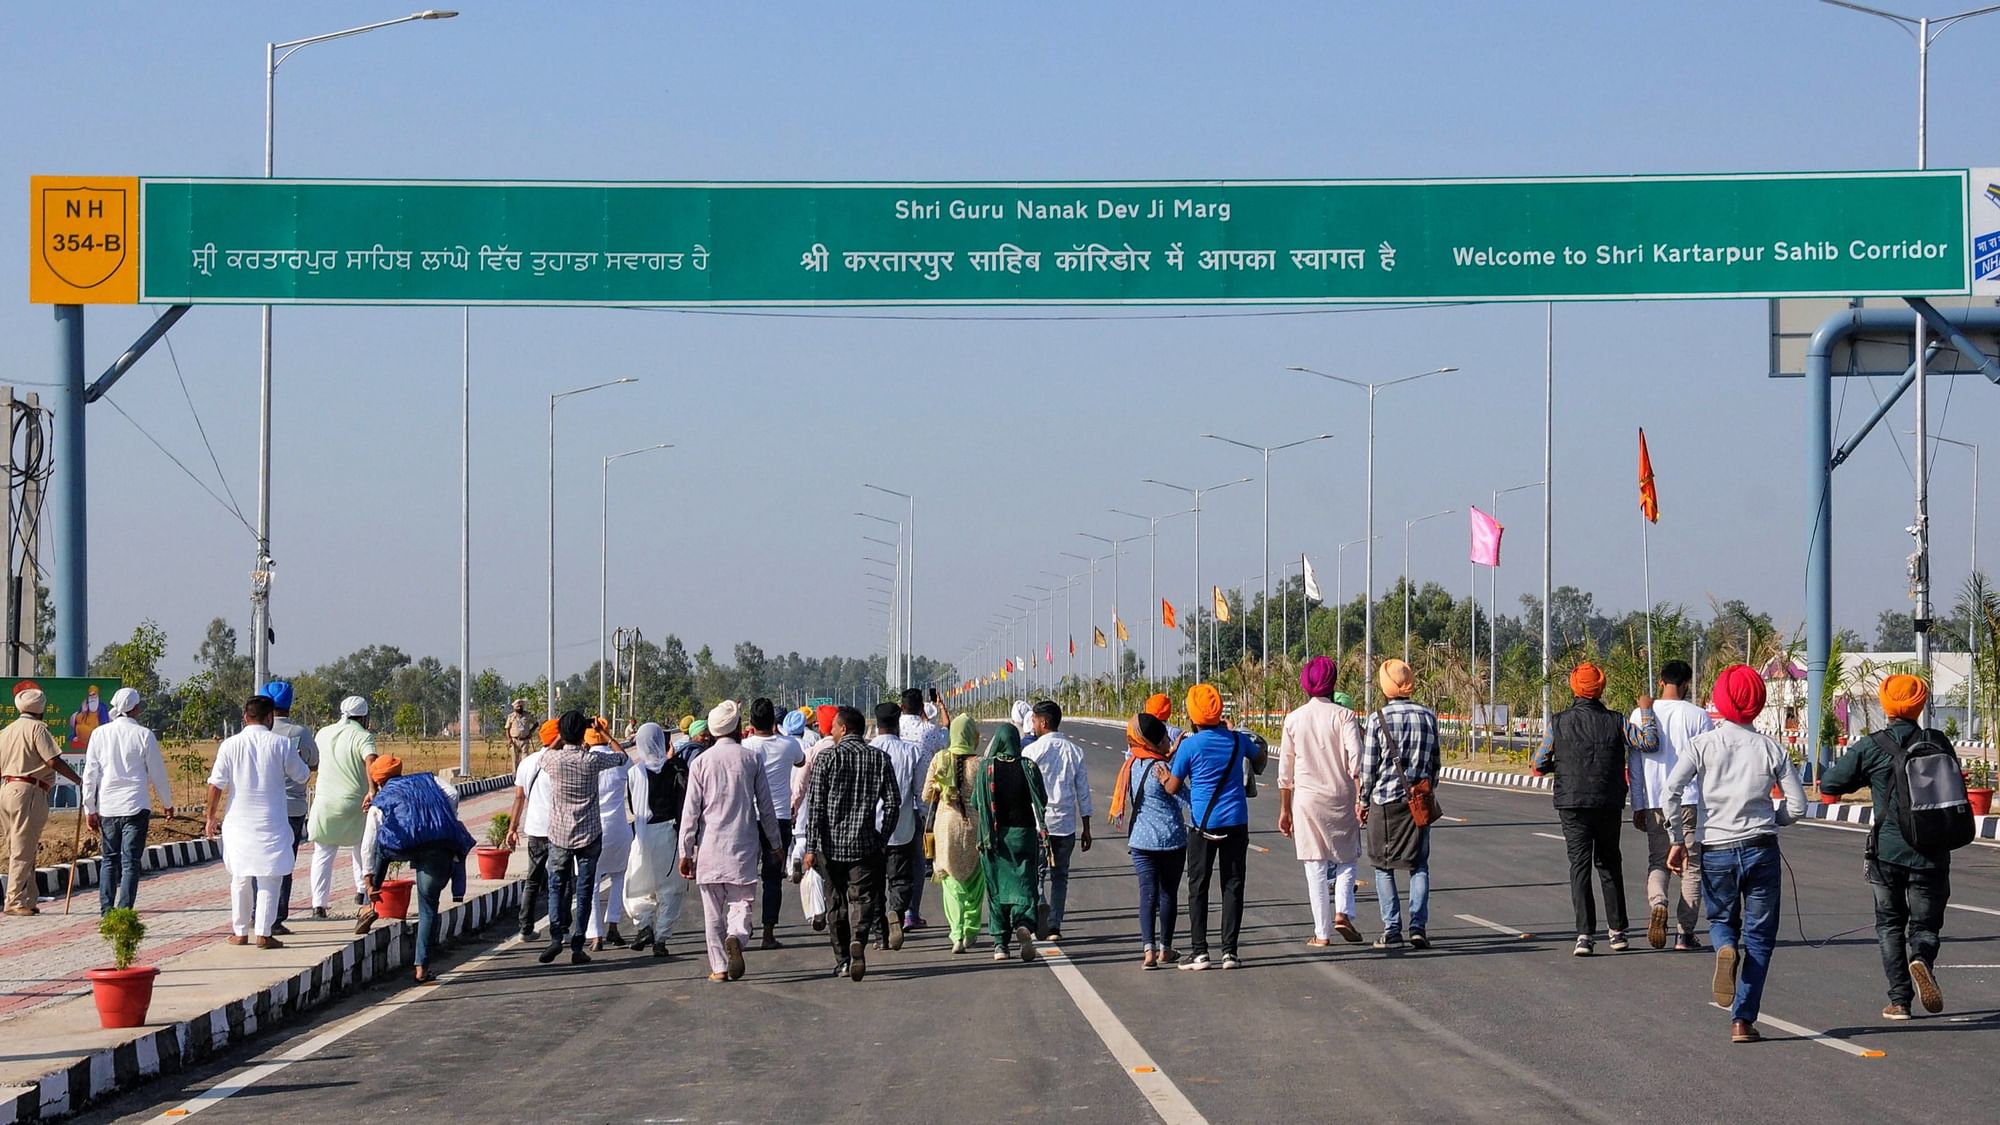  Sikh devotees stand with folded hands near the zero line as they pay obeisance facing the Kartarpur Sahib Gurdwara on the day of the inauguration of the Kartarpur corridor, in Gurdaspur. Image used for representation.